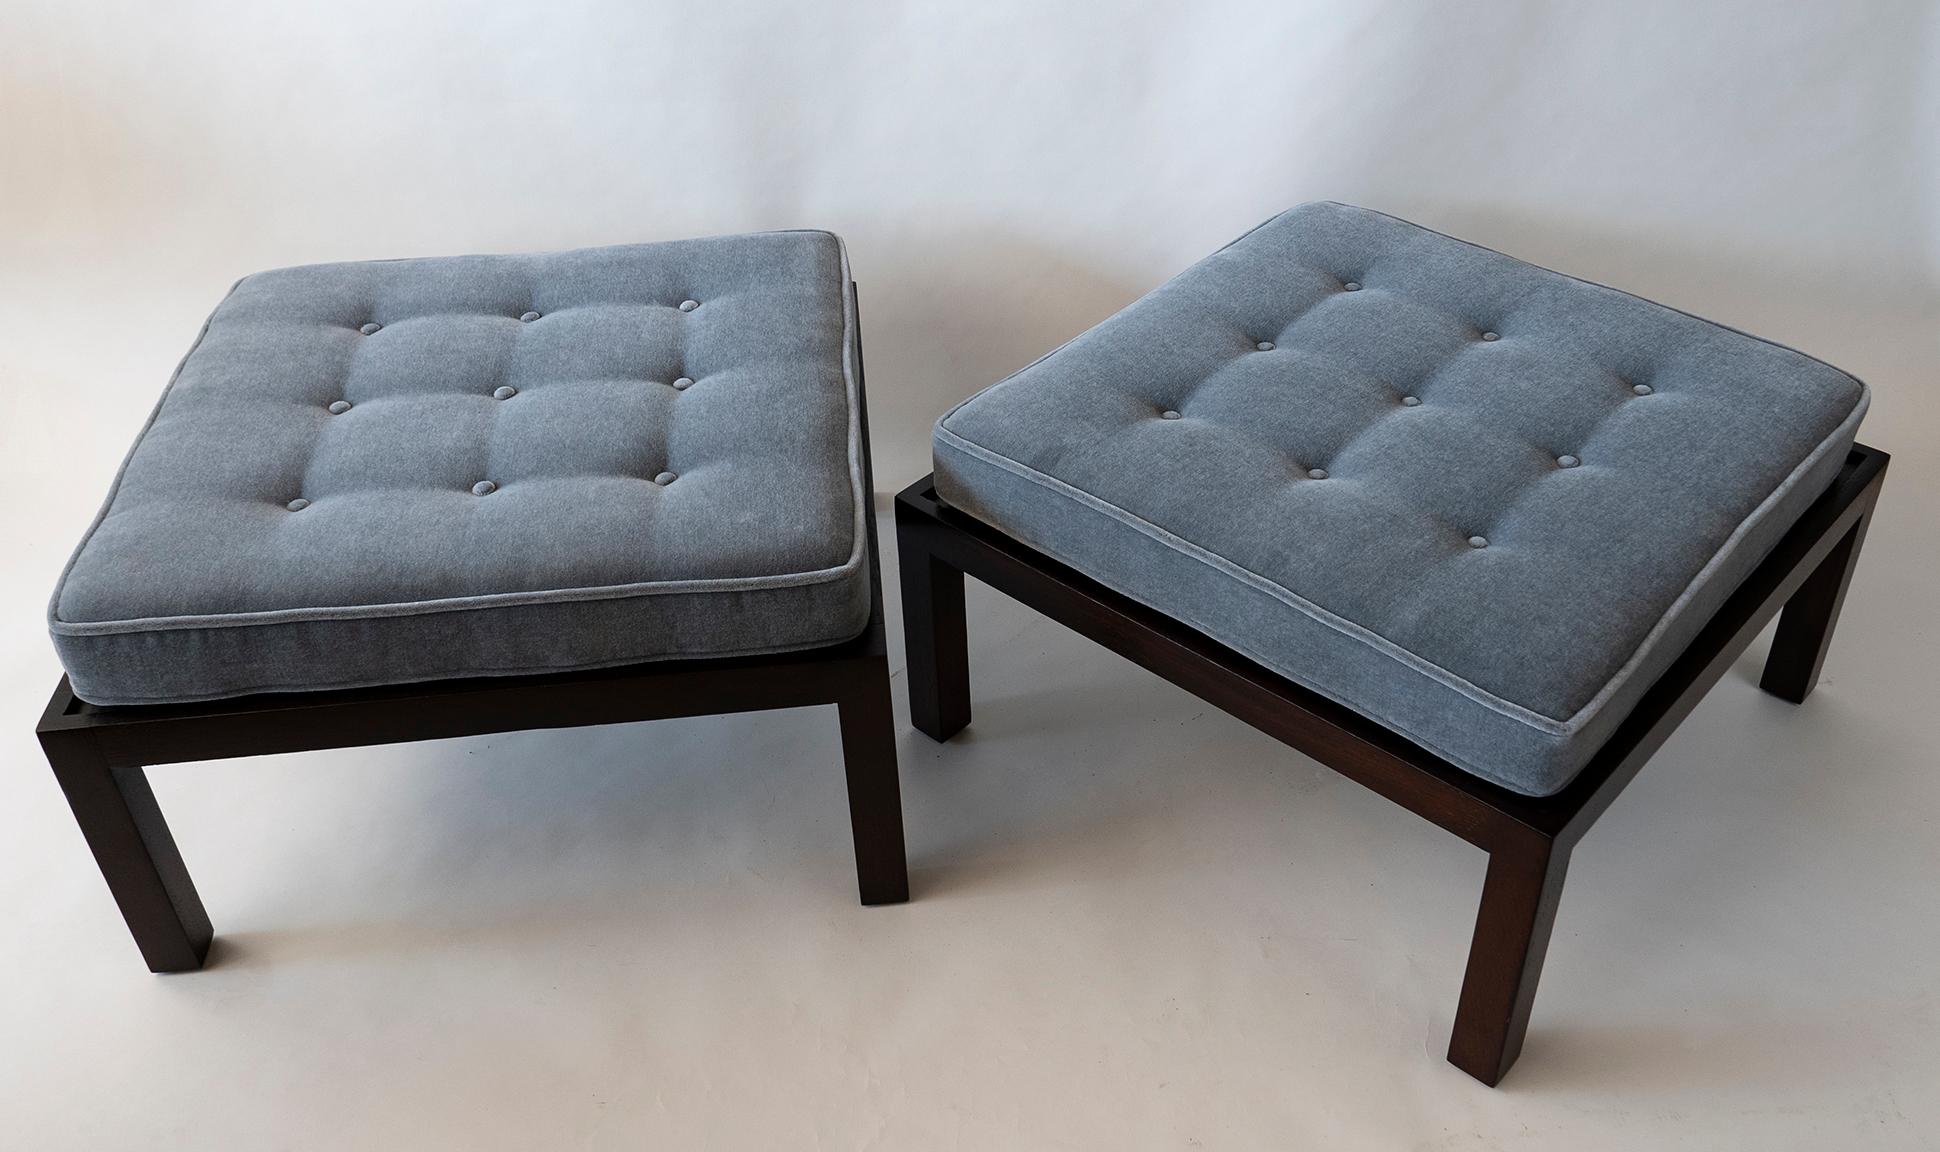 This pair is the rare oversized ottomans that wormley produced small numbers.